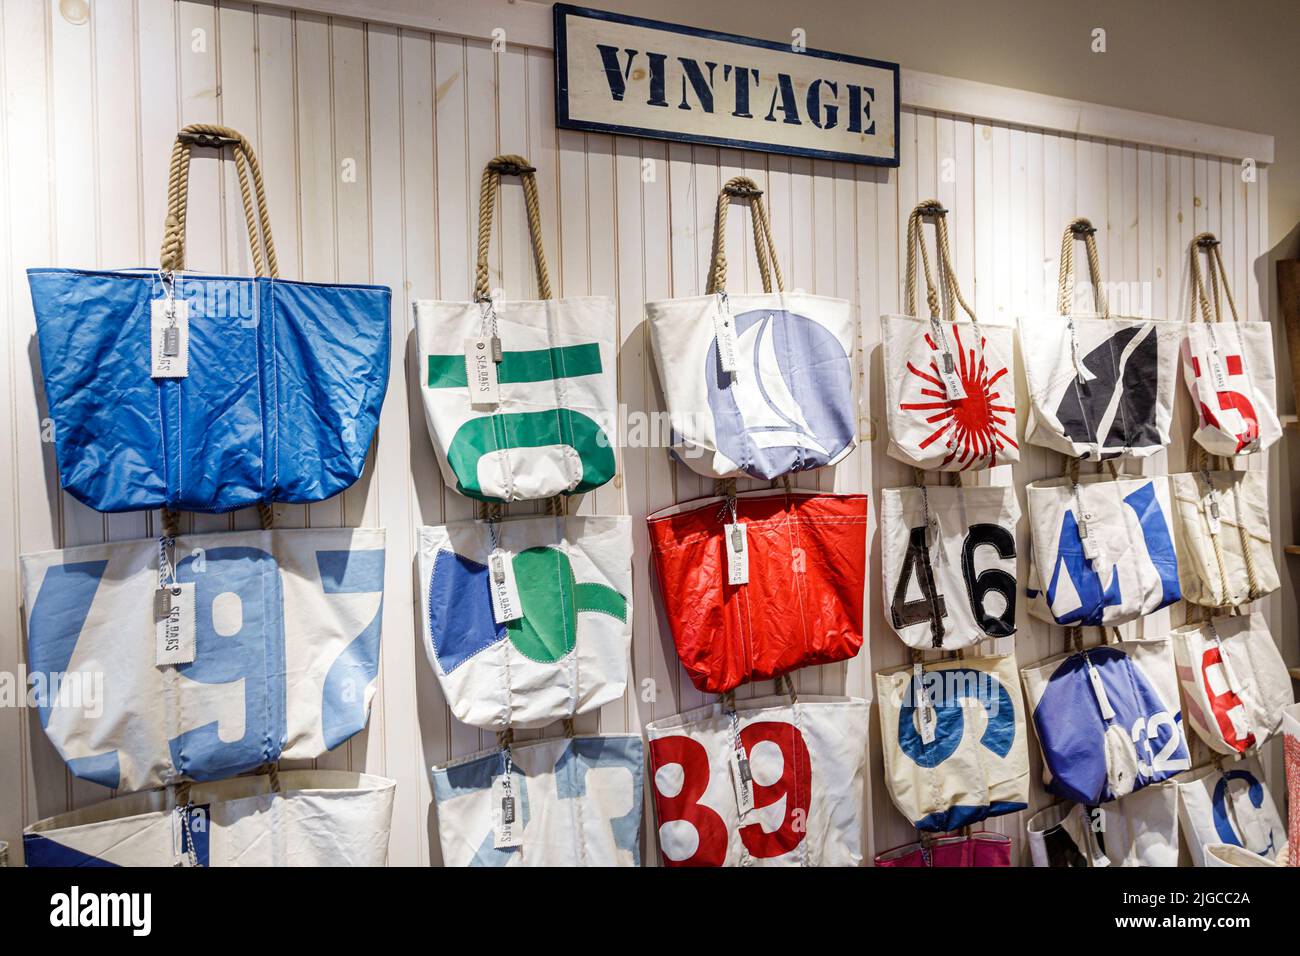 Punta Gorda Florida,Fishermen's Village shopping dining complex,Sea Bags Maine handbags repurposed made from recycled sails sustainability,inside inte Stock Photo